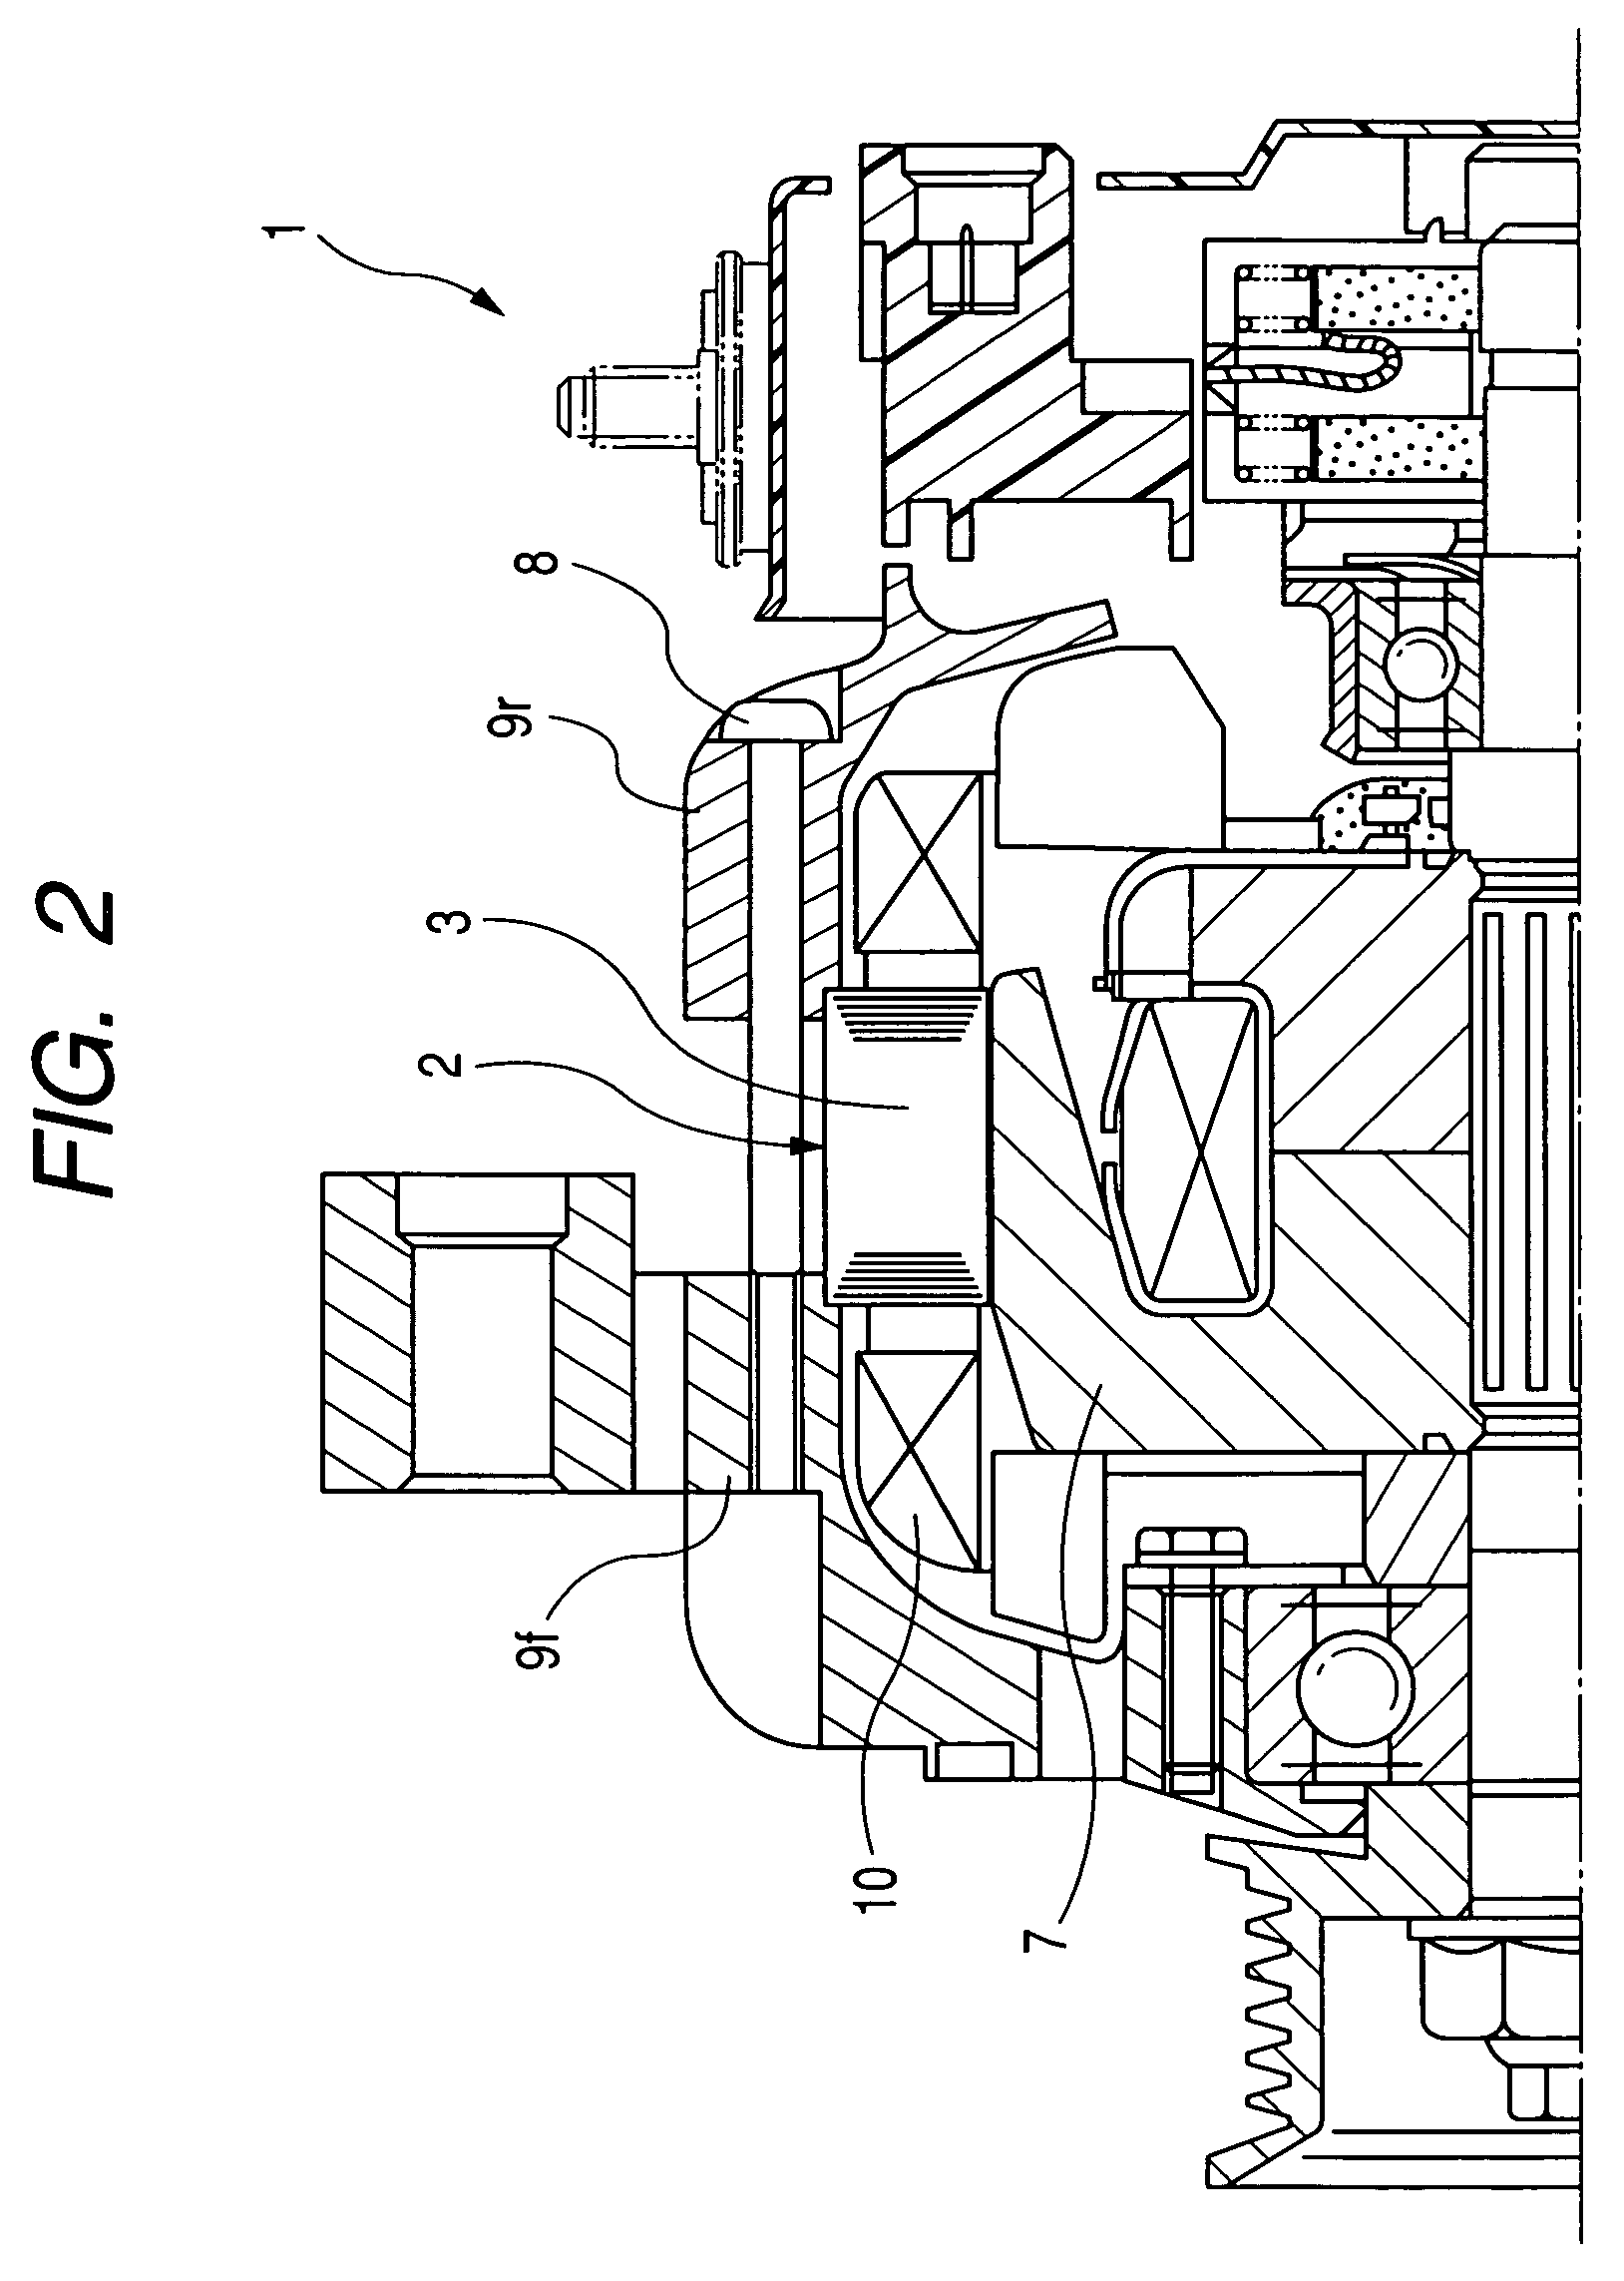 Method of manufacturing stator core of electric rotating machine